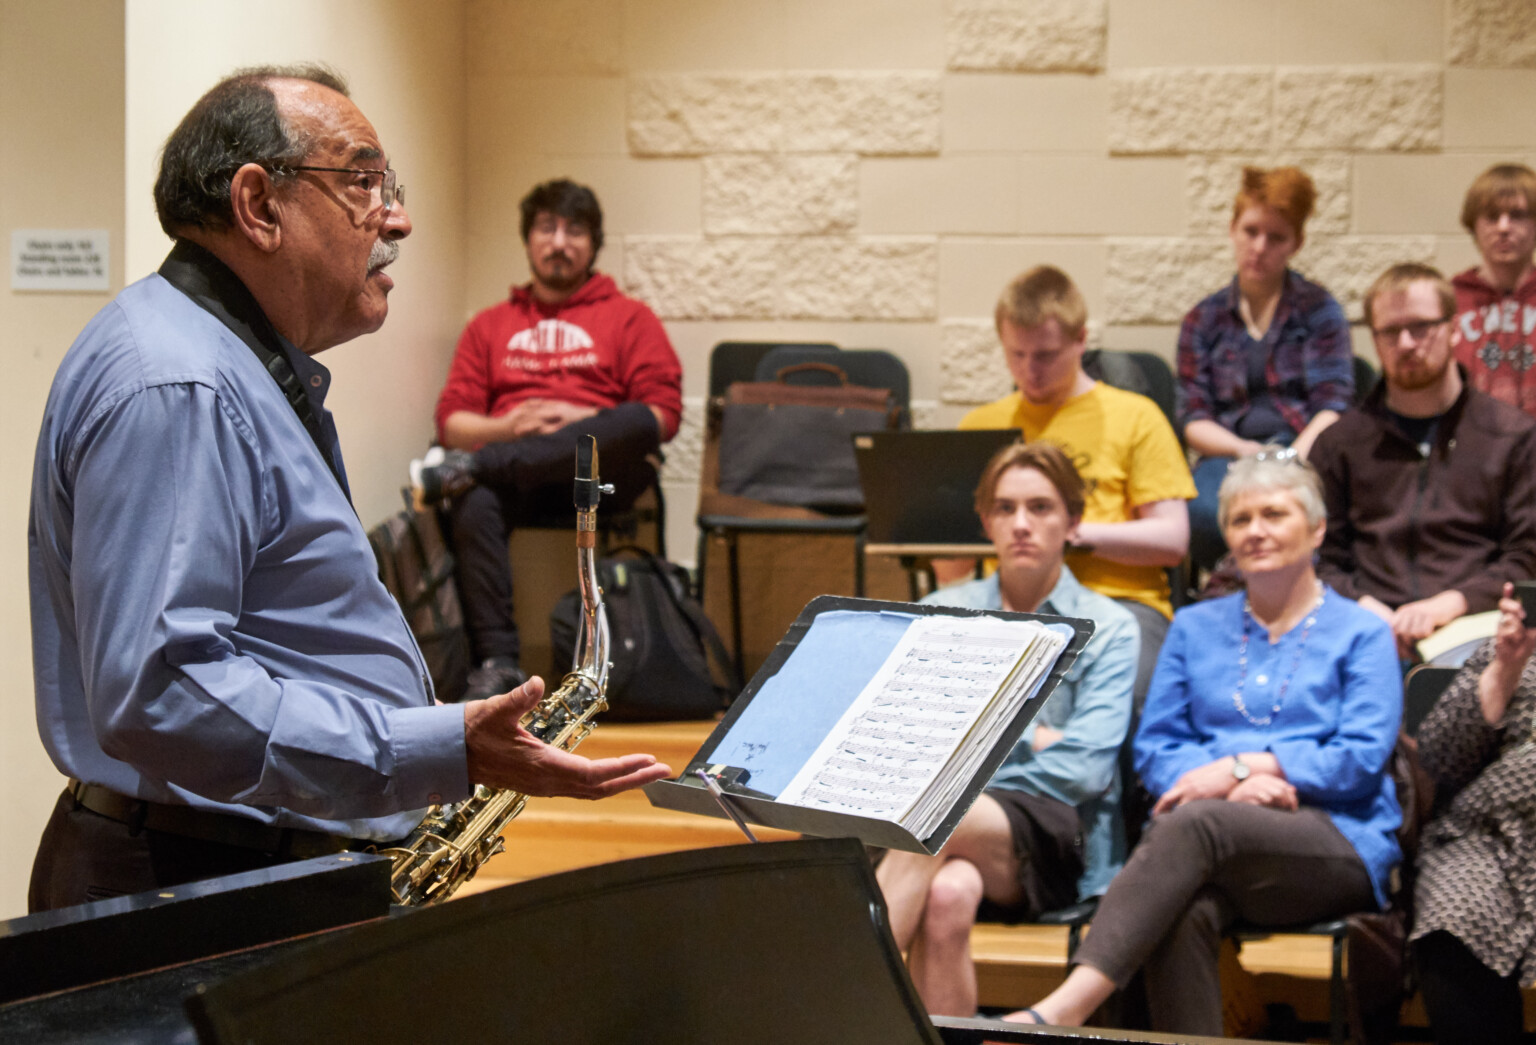 Ernie Watts giving lecture